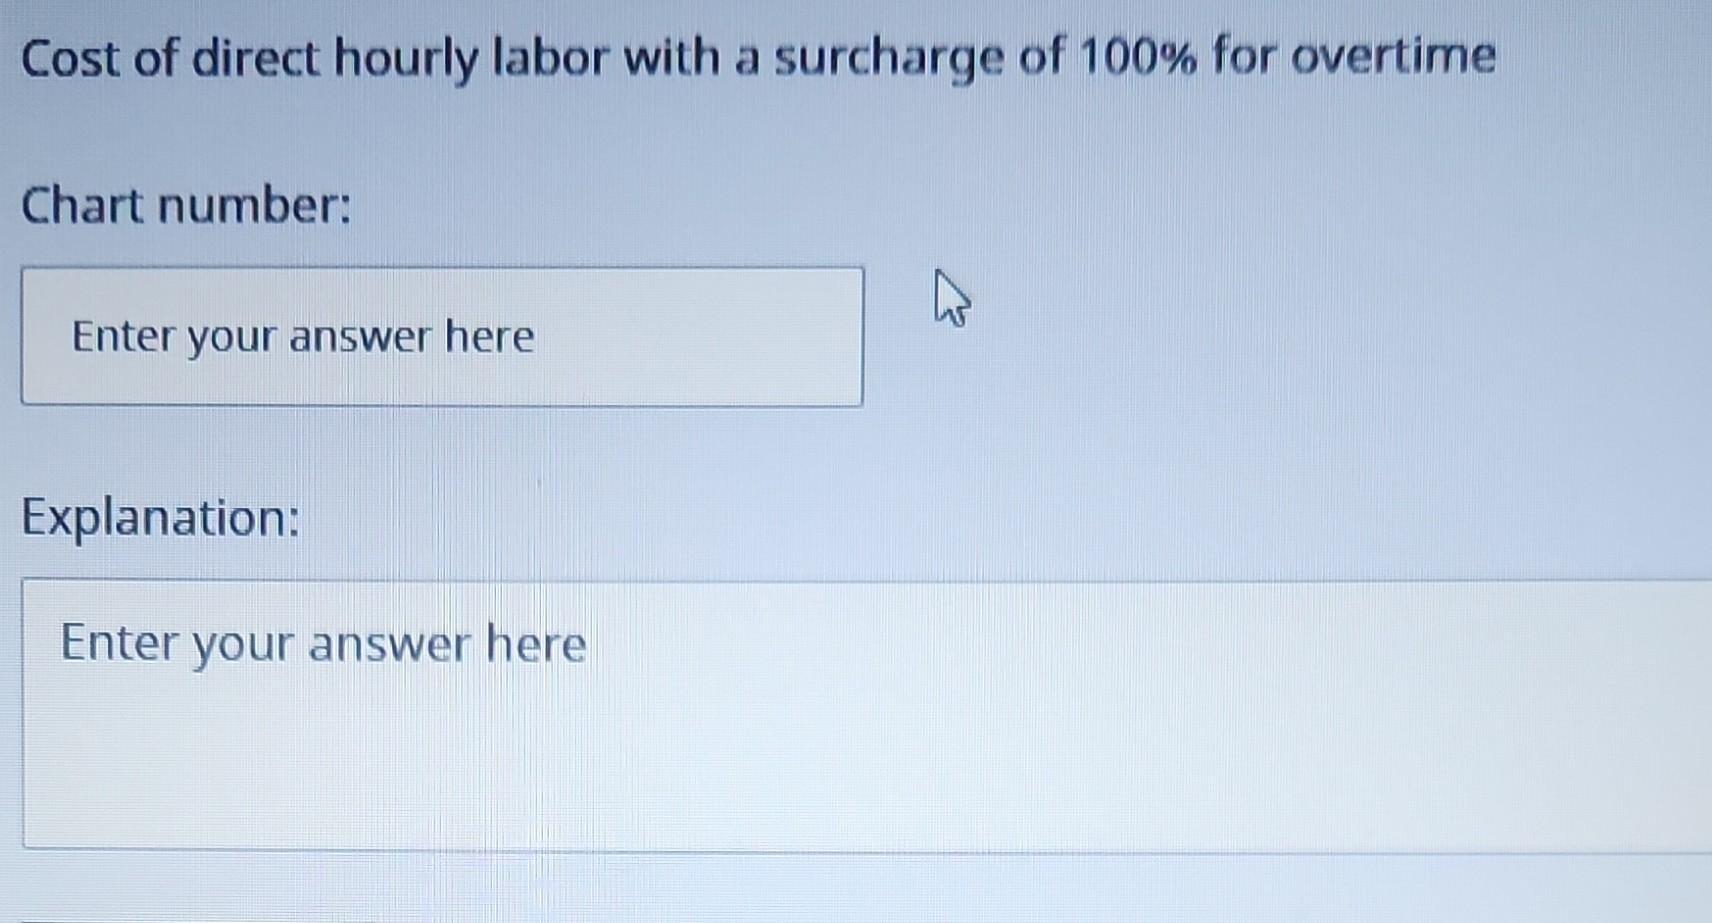 Cost of direct hourly labor with a surcharge of ( 100 % ) for overtimeChart number:Explanation:Enter your answer here